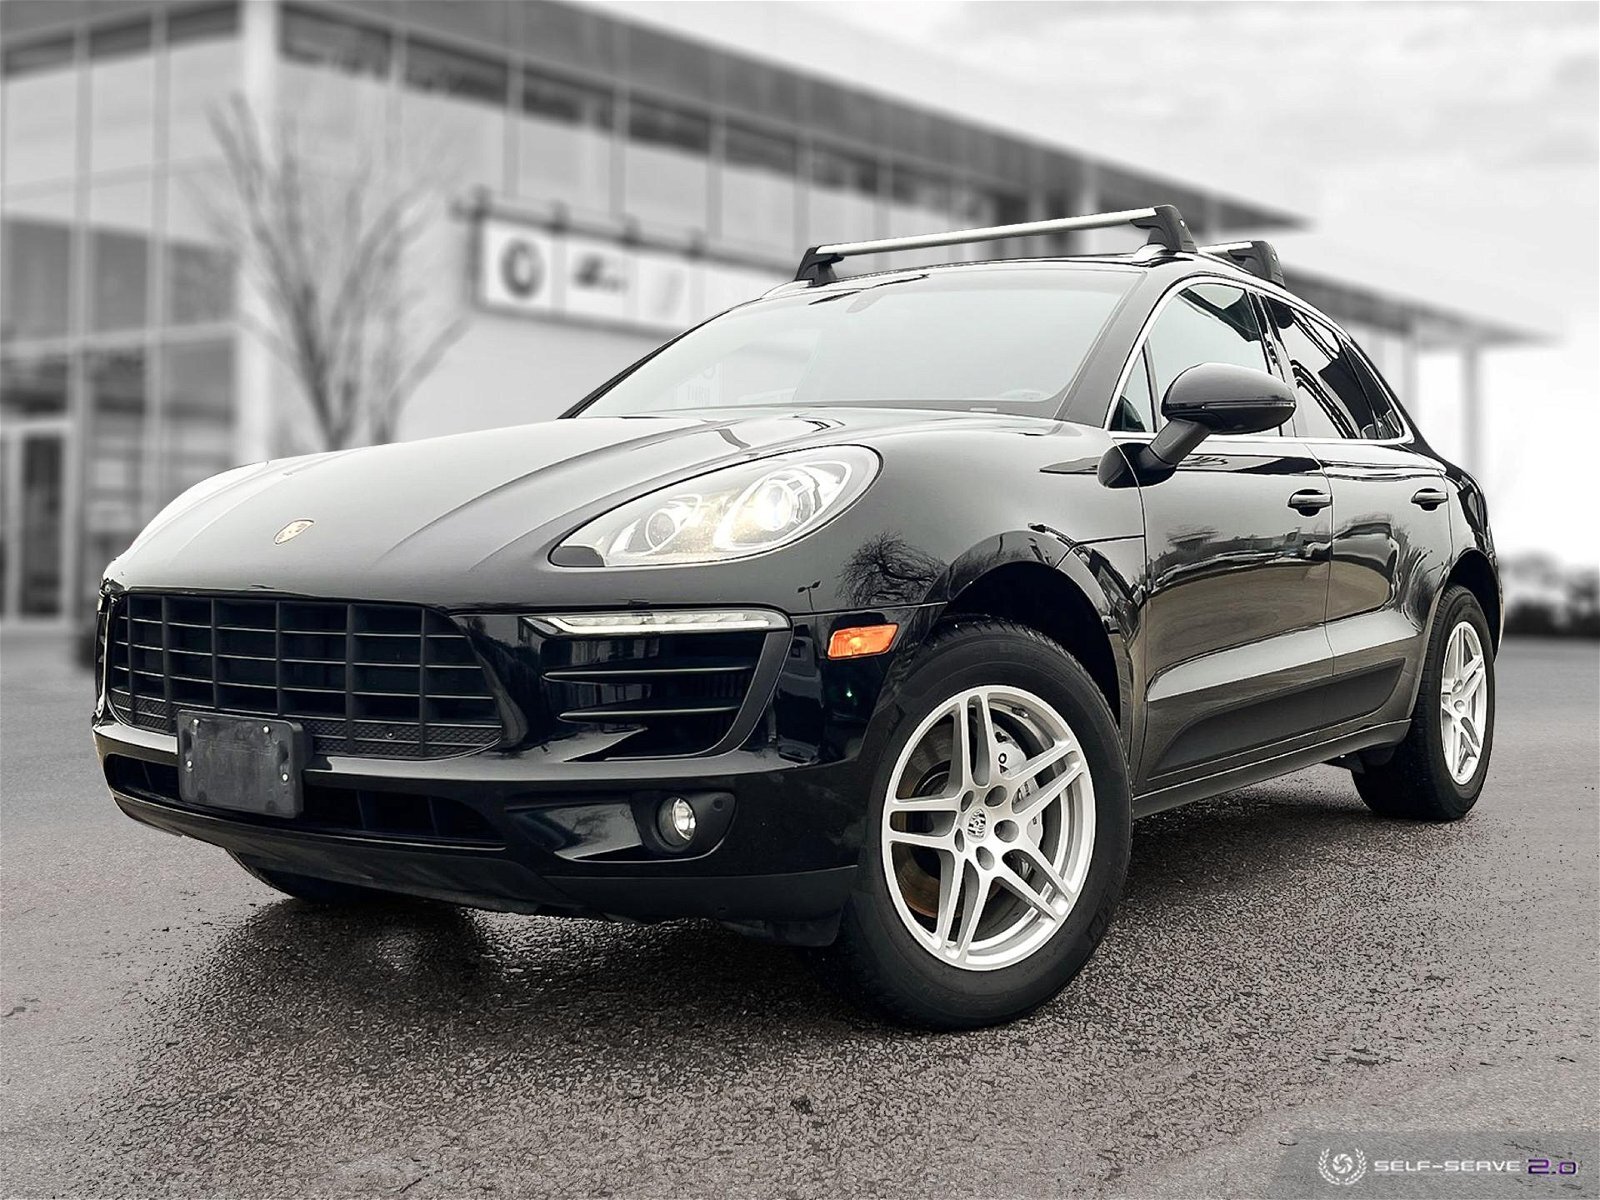 2015 Porsche Macan S Sold and Delivered!!